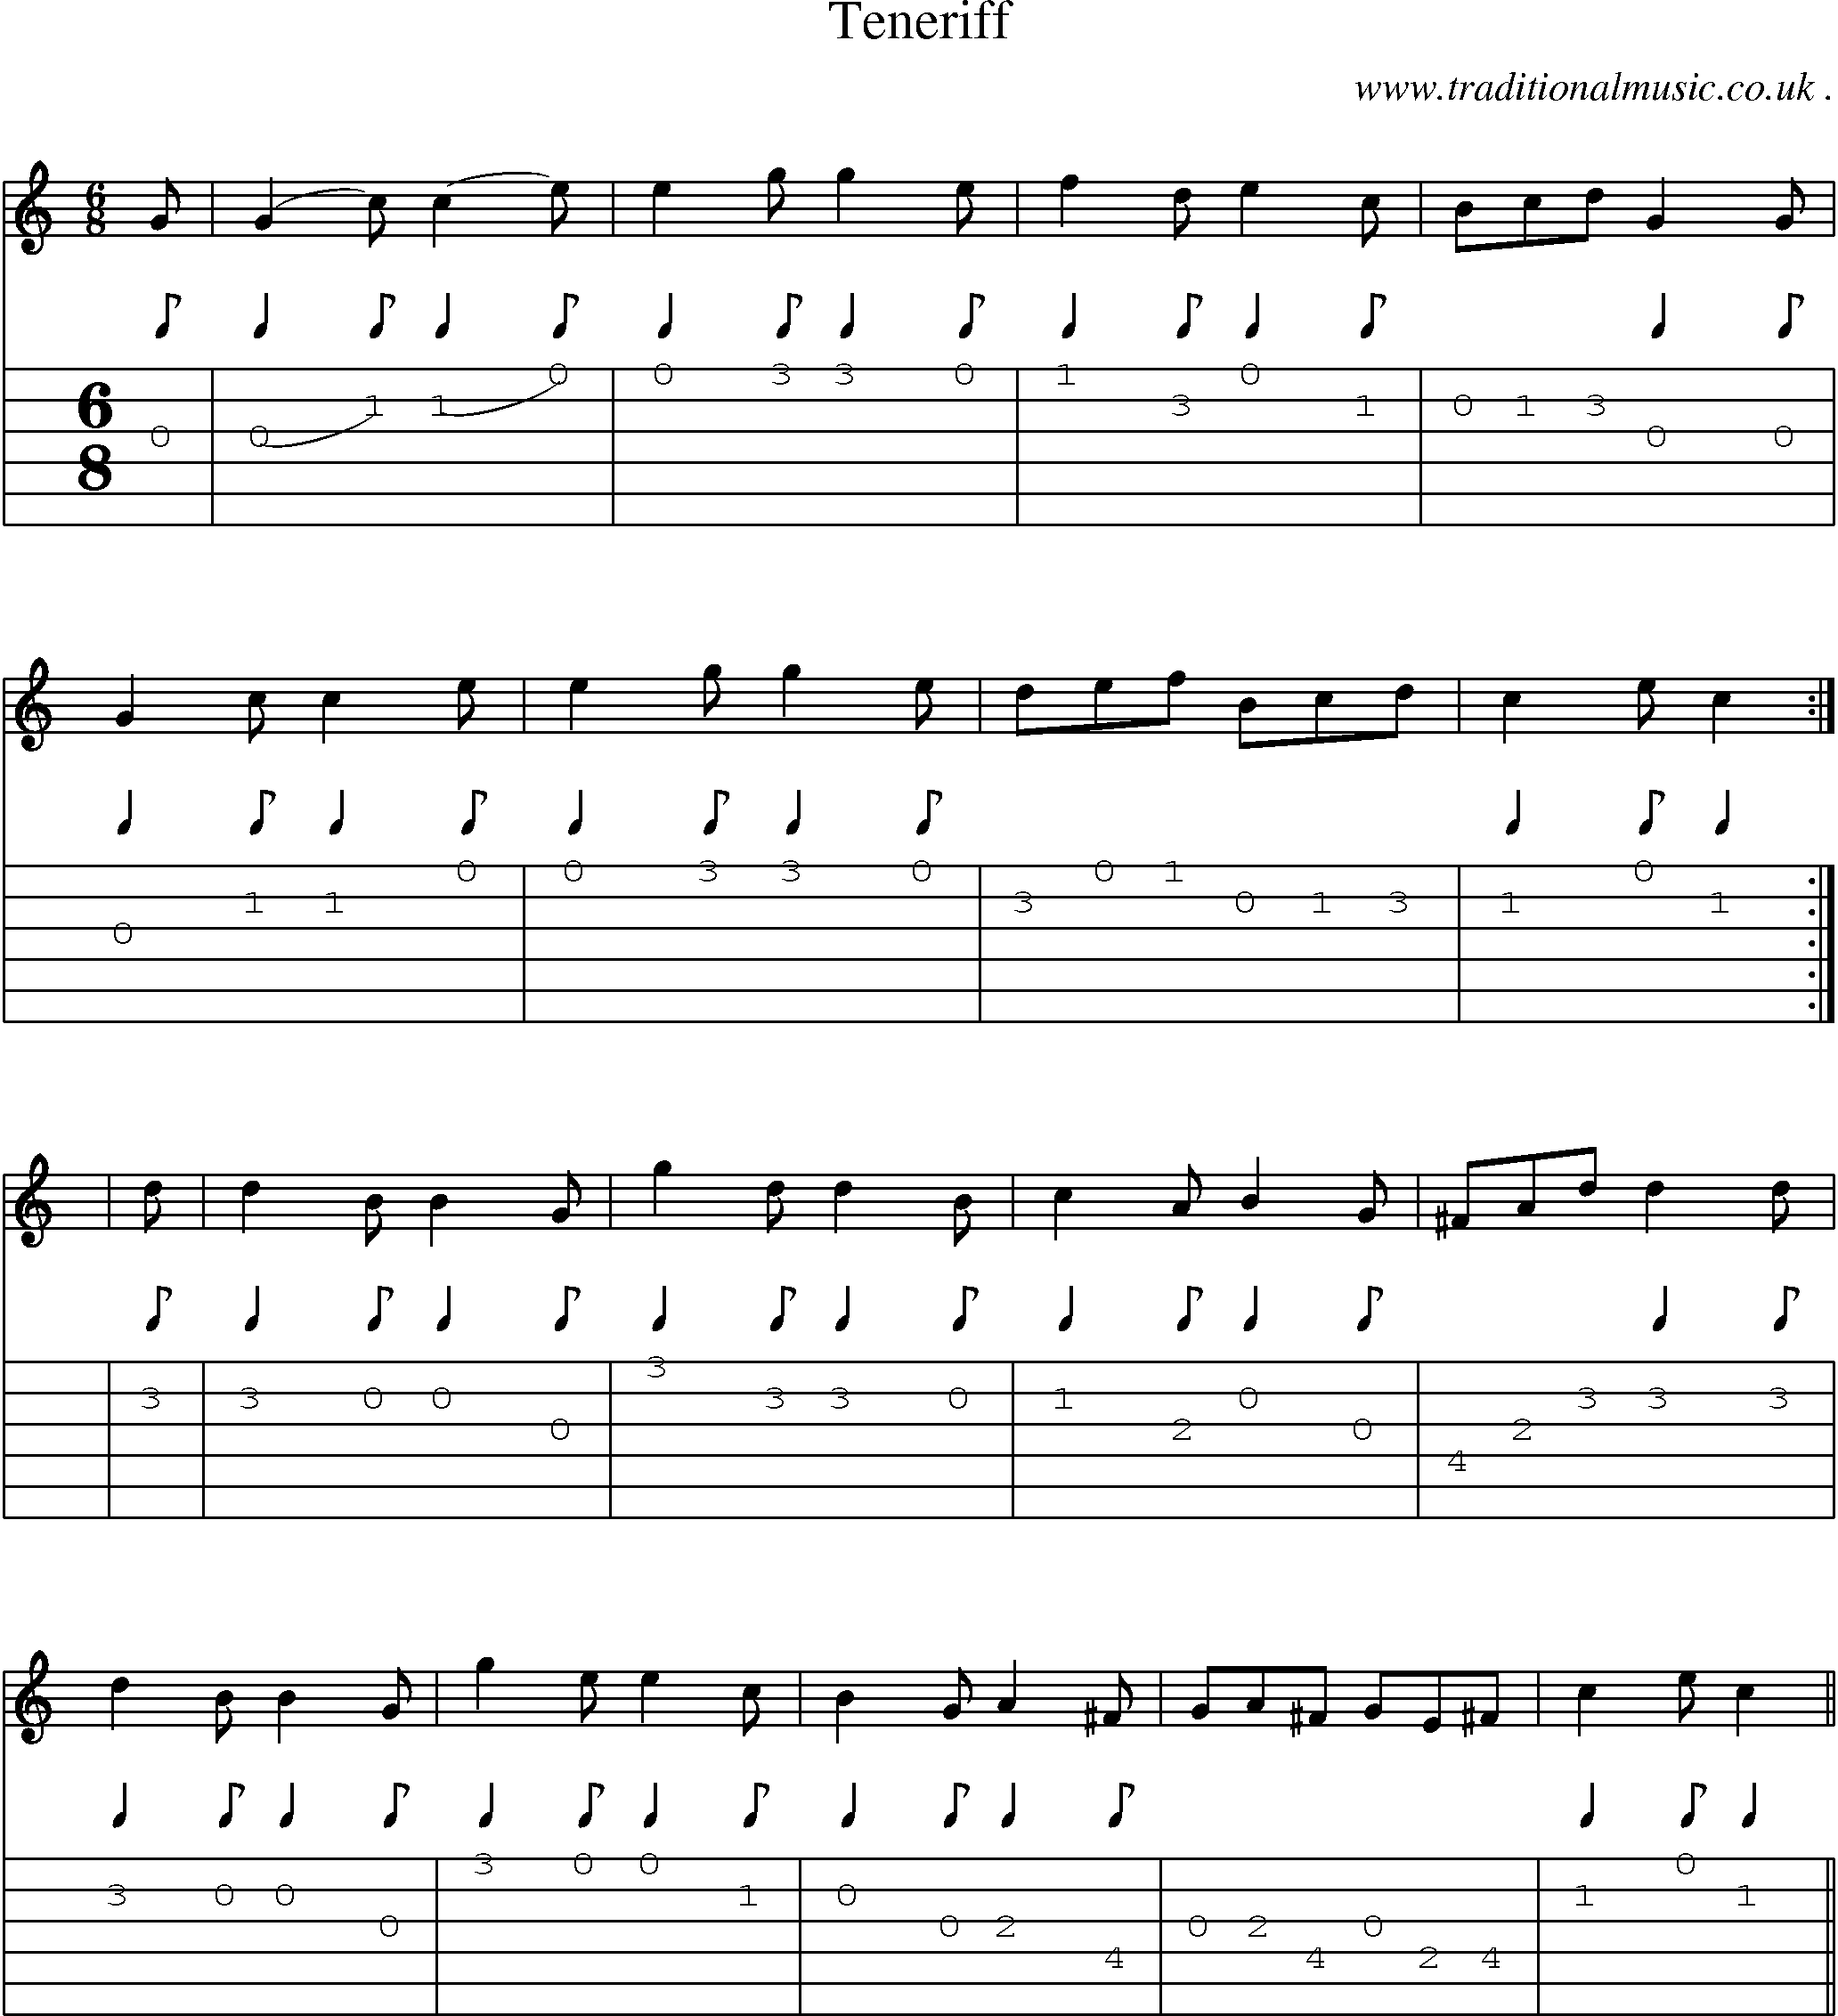 Sheet-Music and Guitar Tabs for Teneriff